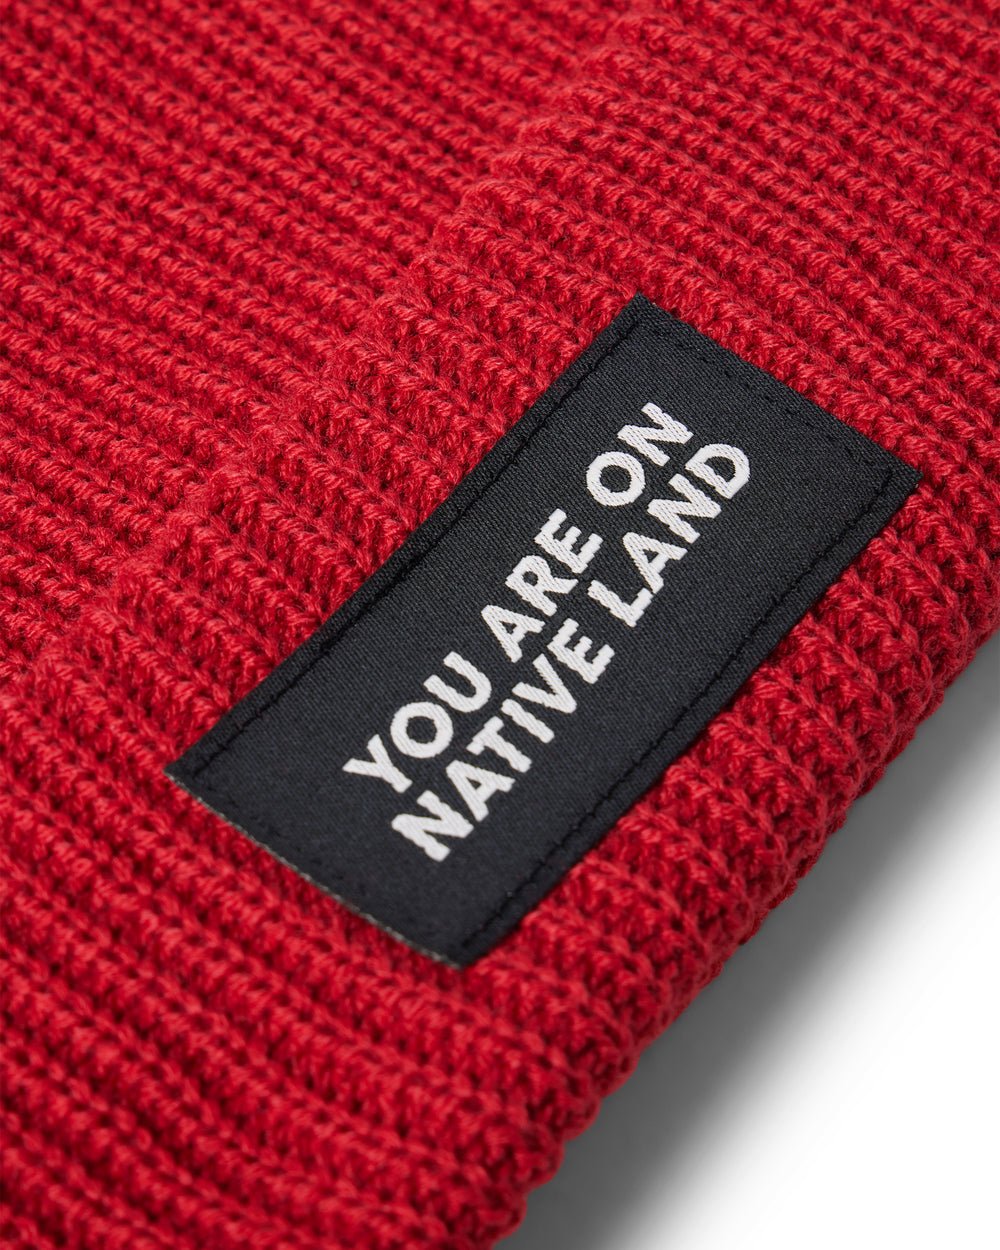 'YOU ARE ON NATIVE LAND' RIBBED BEANIE - ARTISANAL RED